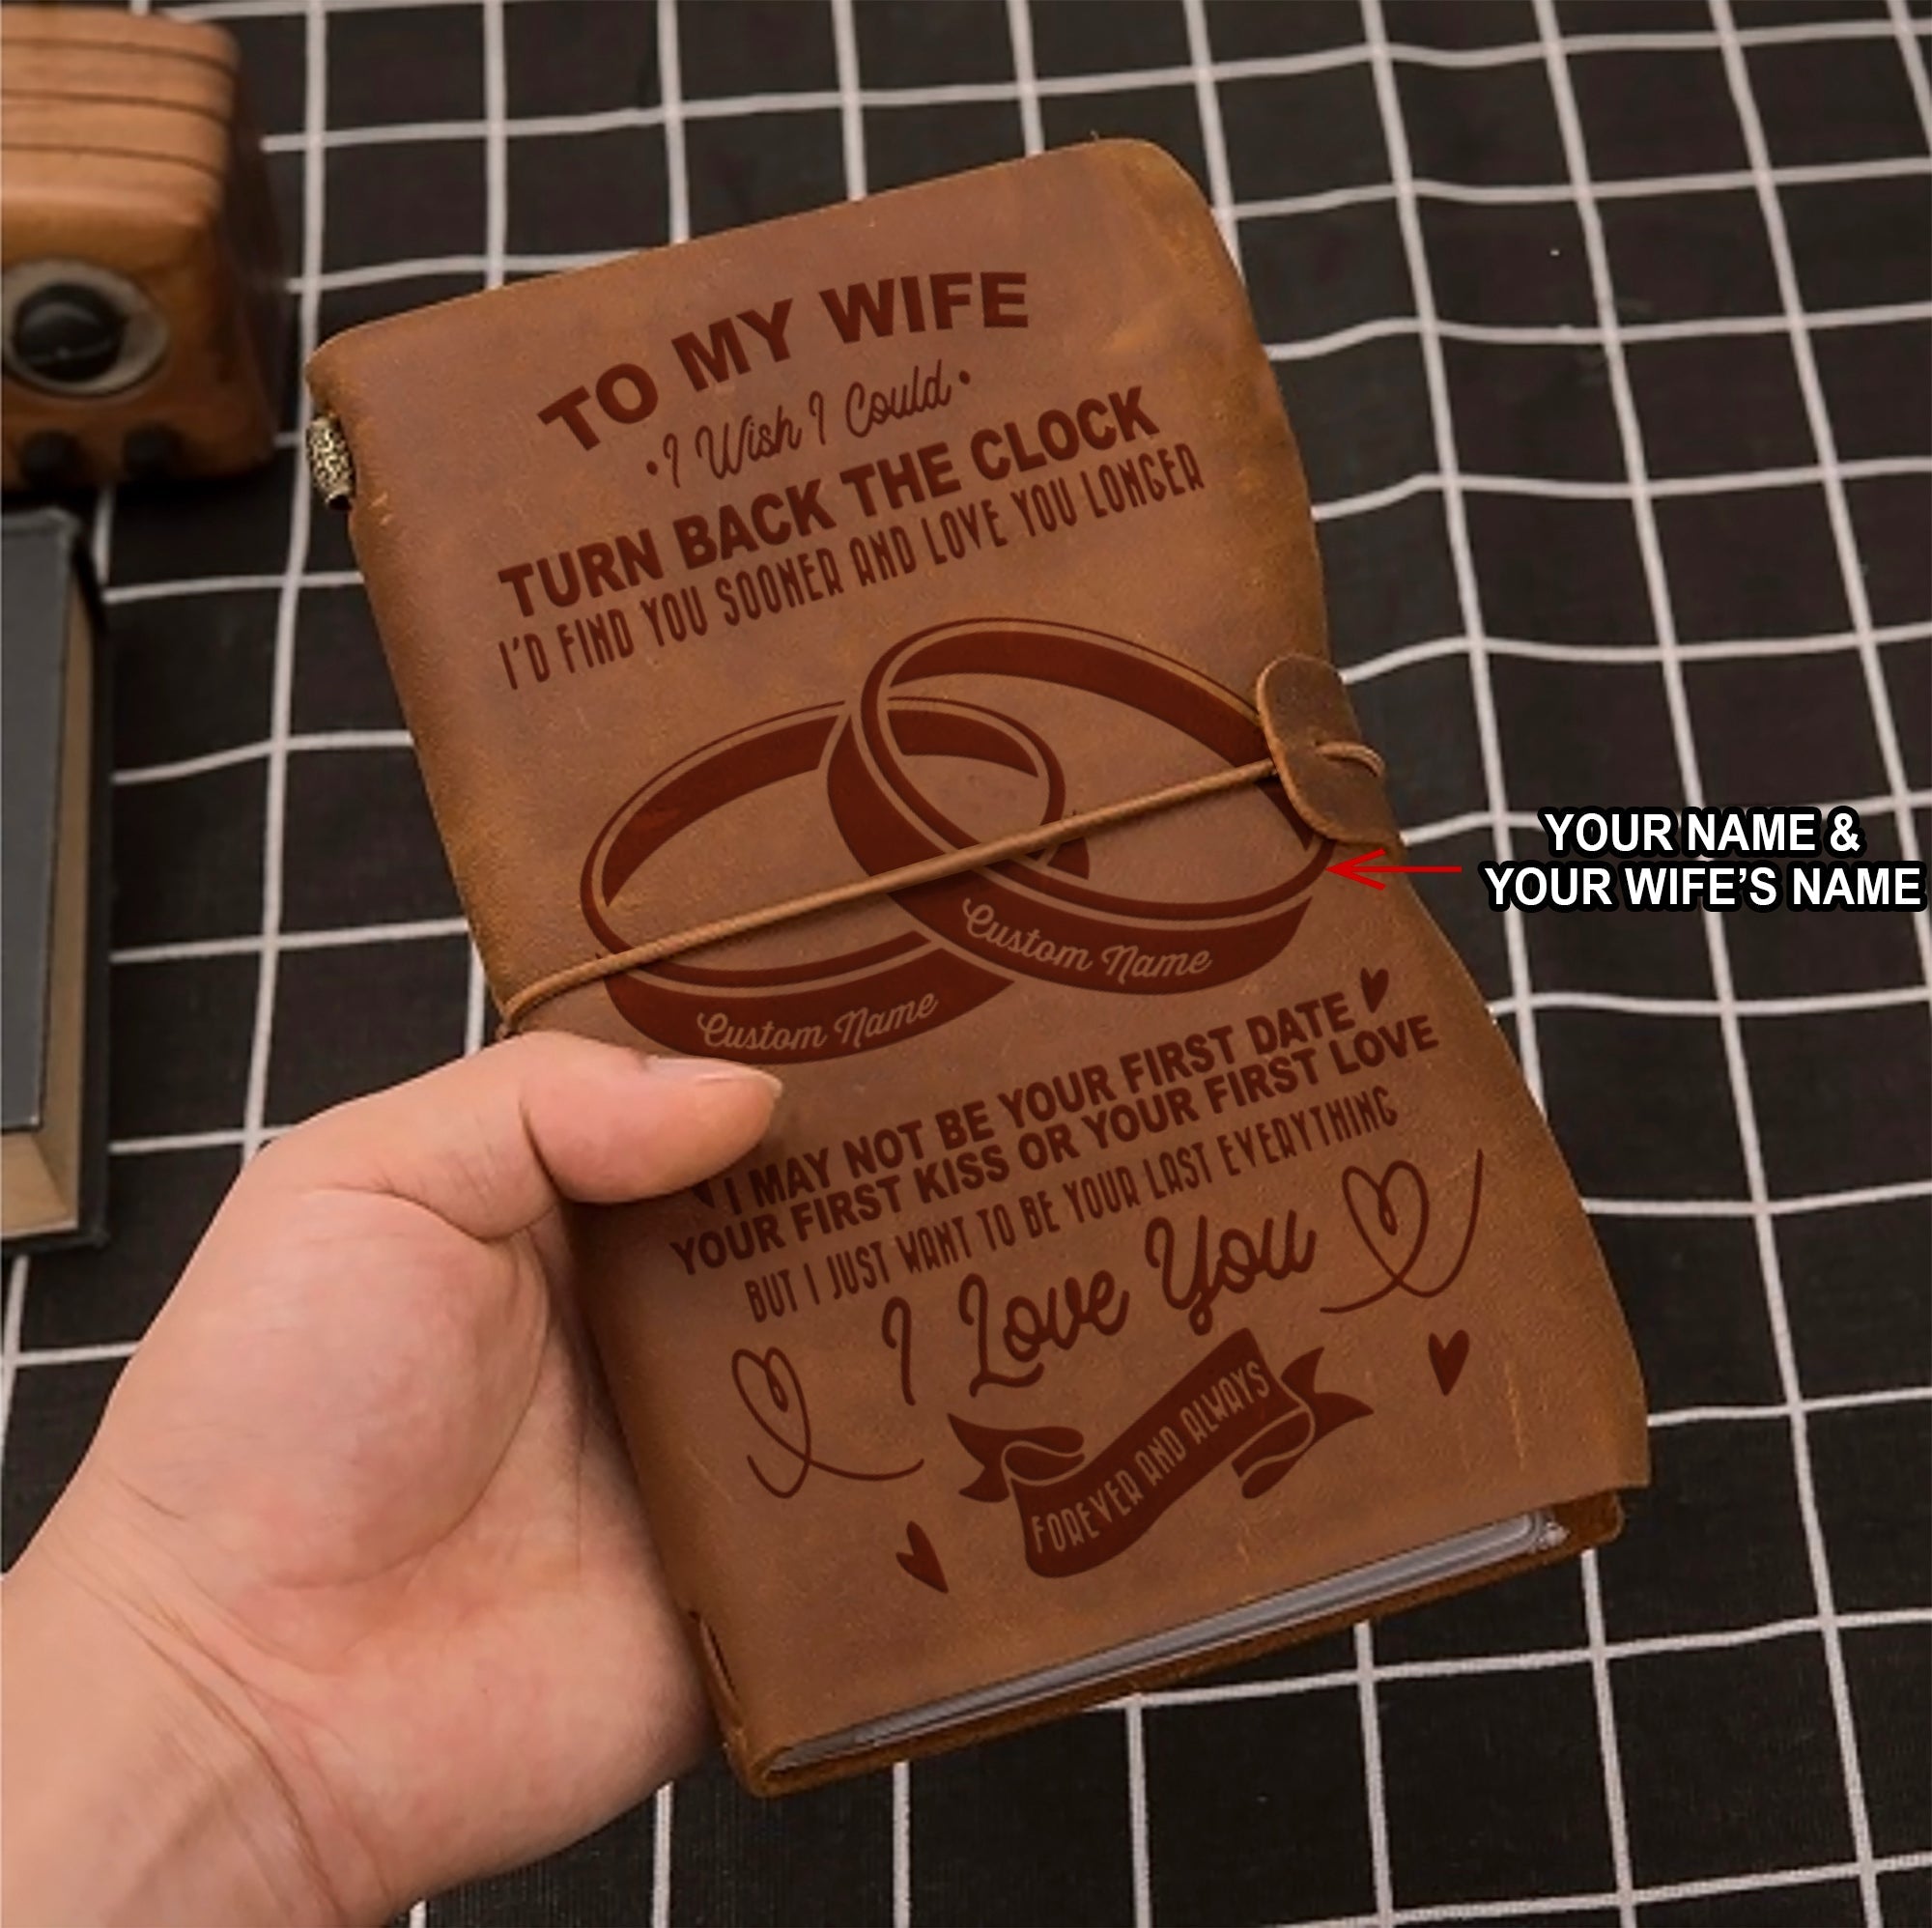 Valentines gifts-Vintage Journal Husband to wife I wish i could turn back the clock